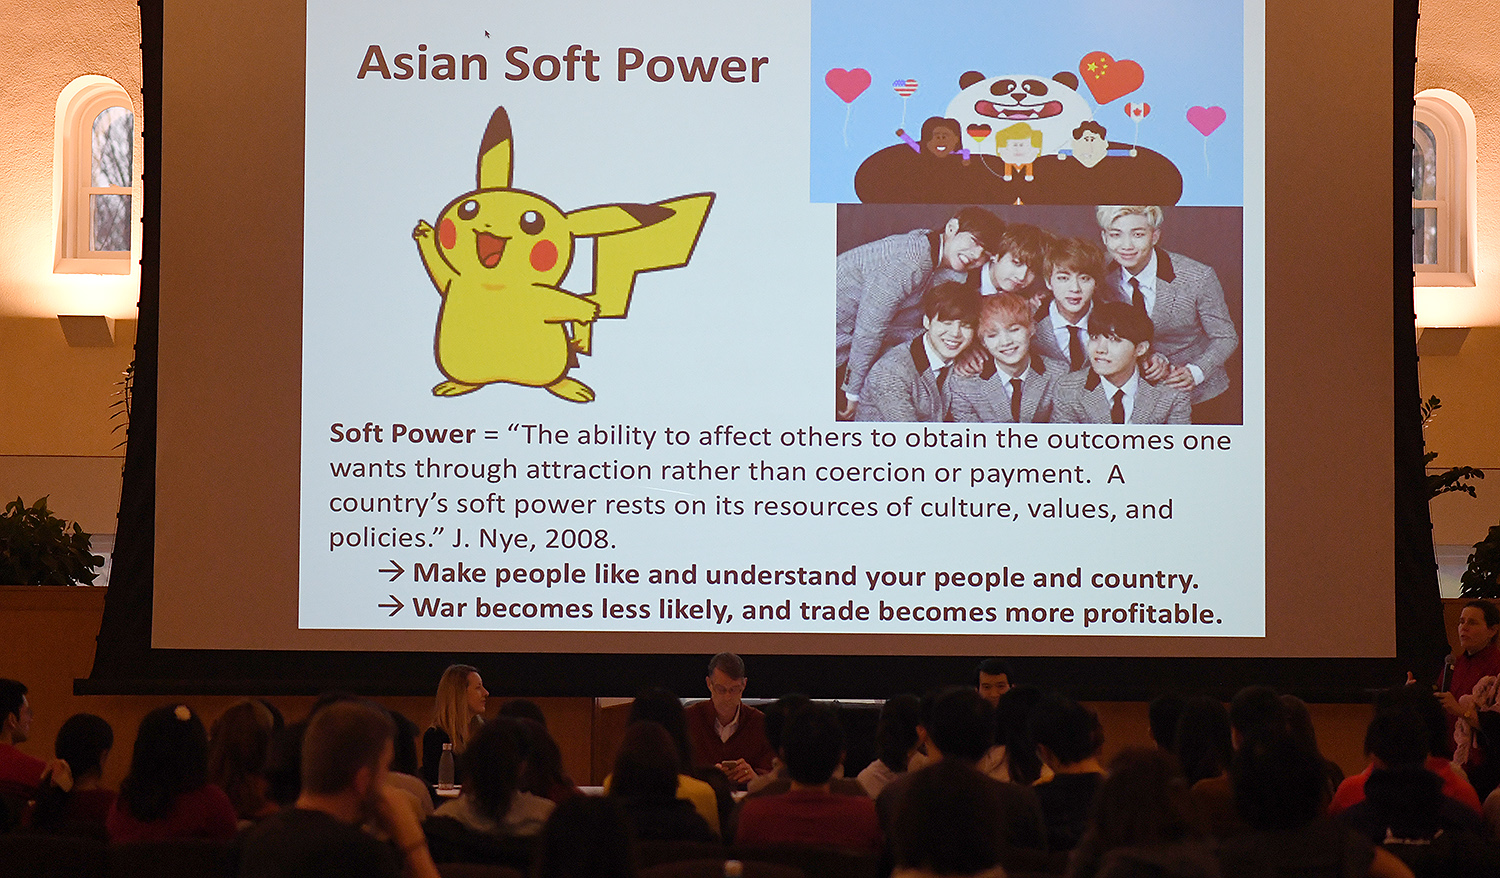 Soft Power is defined as the ability to affect others to obtain the outcomes one wants through attraction rather than coercion or payment. A country's soft power rests on its resources of culture, values and policies. 